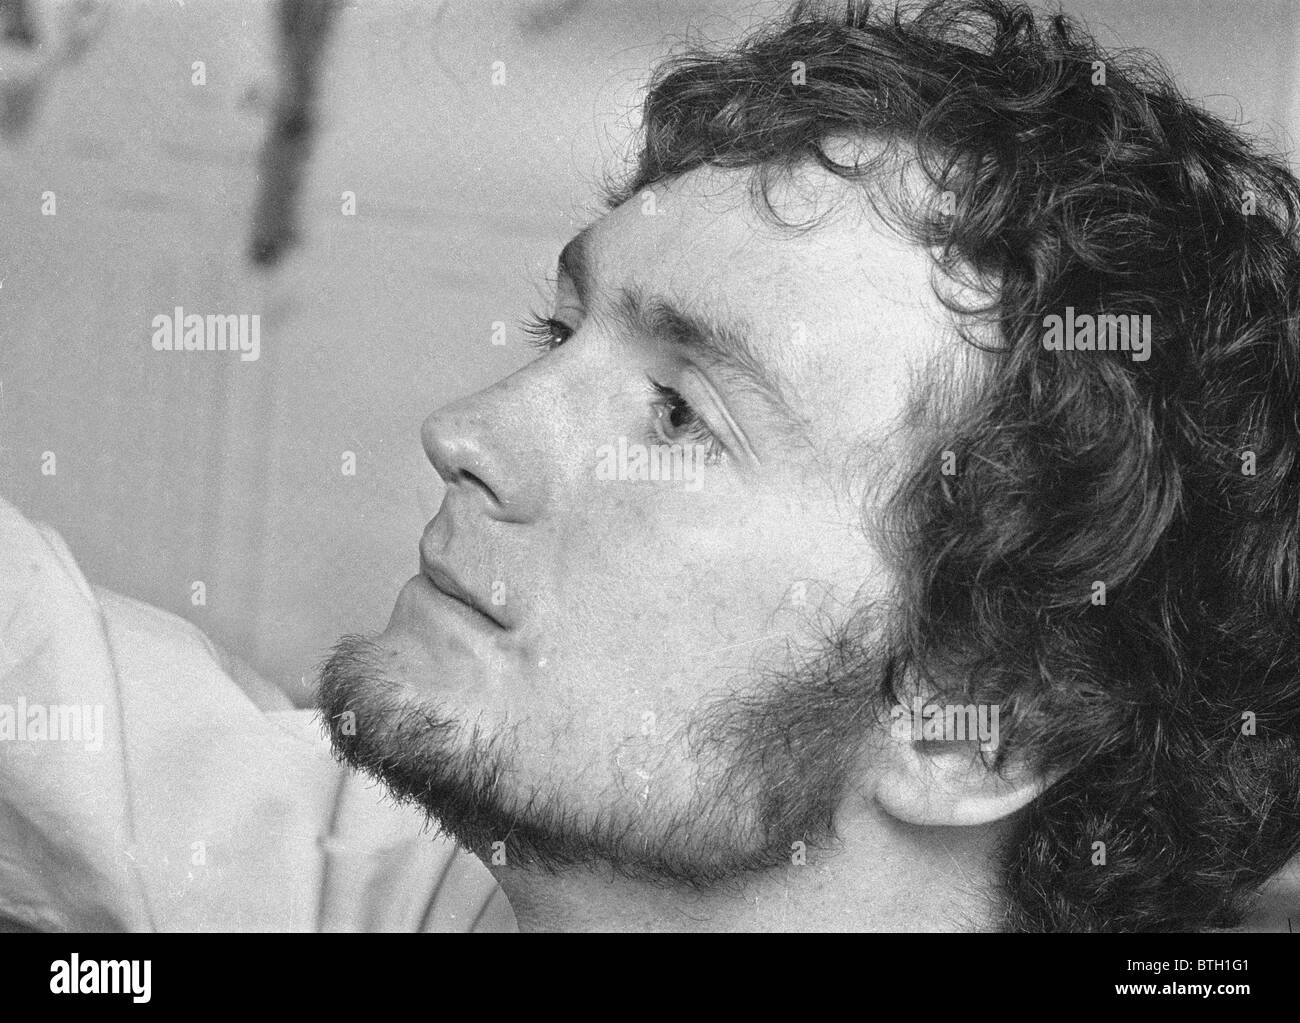 Kenny Everett (born Maurice James Christopher Cole in Seaforth, Merseyside; ...